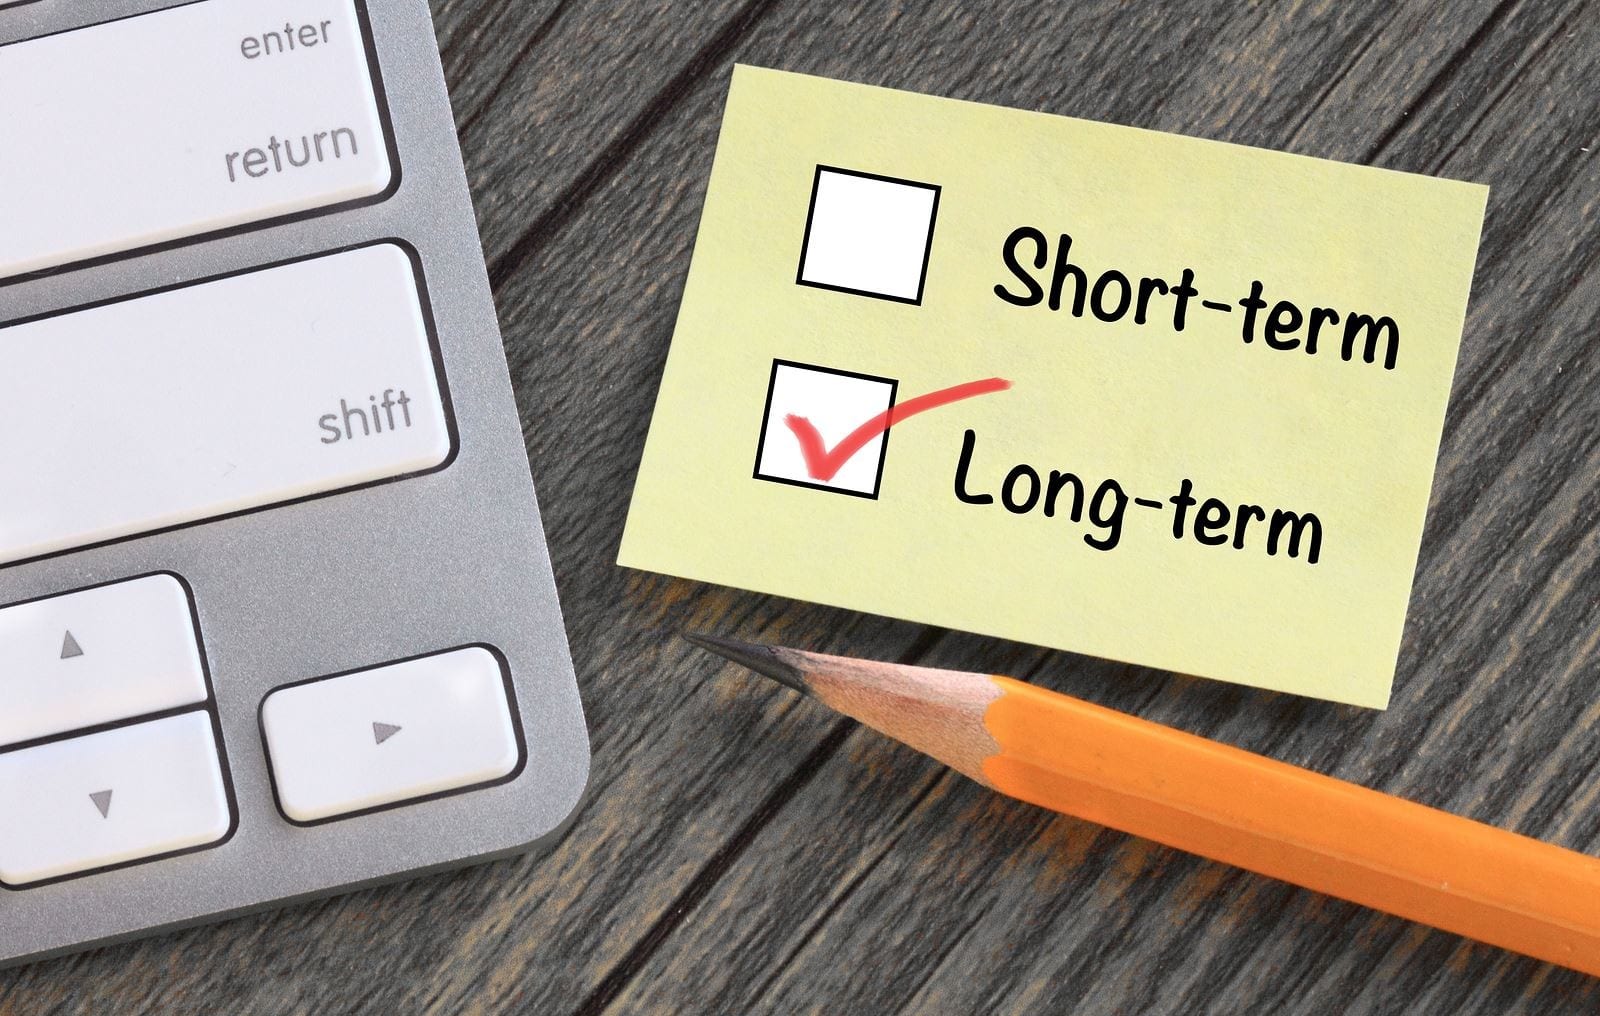 Pros and Cons: Three main long-term investment strategies